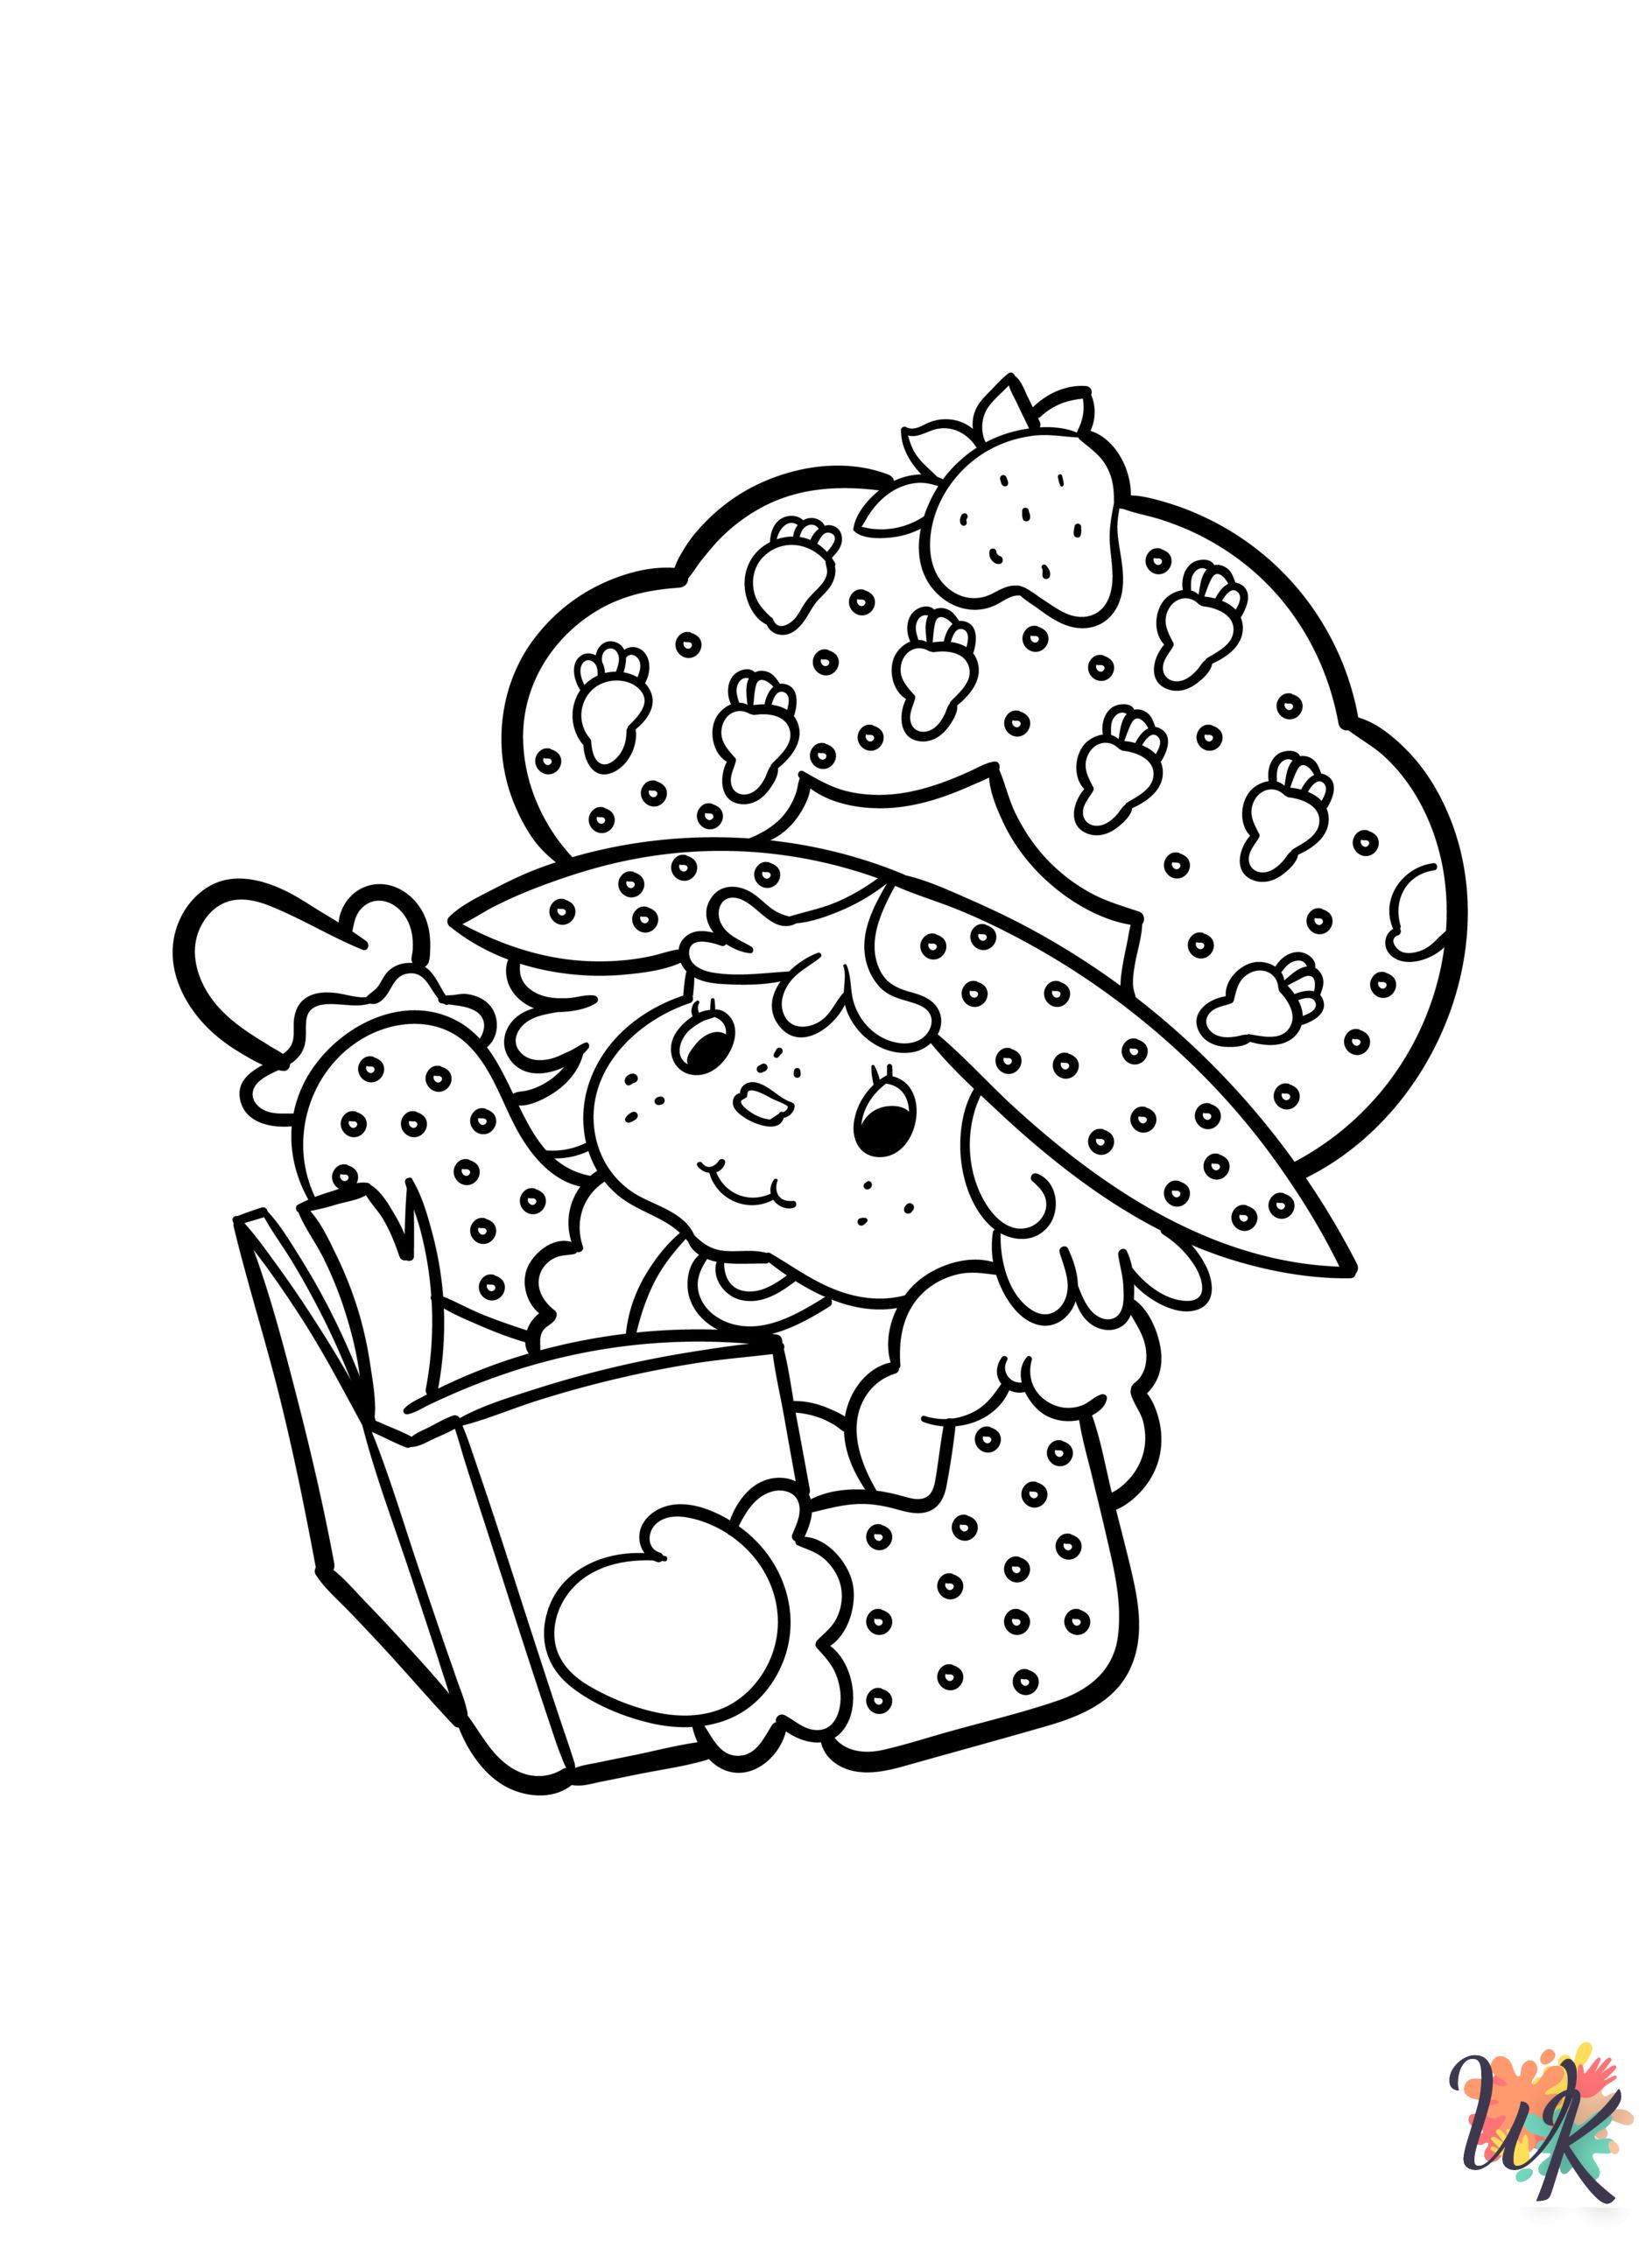 preschool Strawberry Shortcake coloring pages